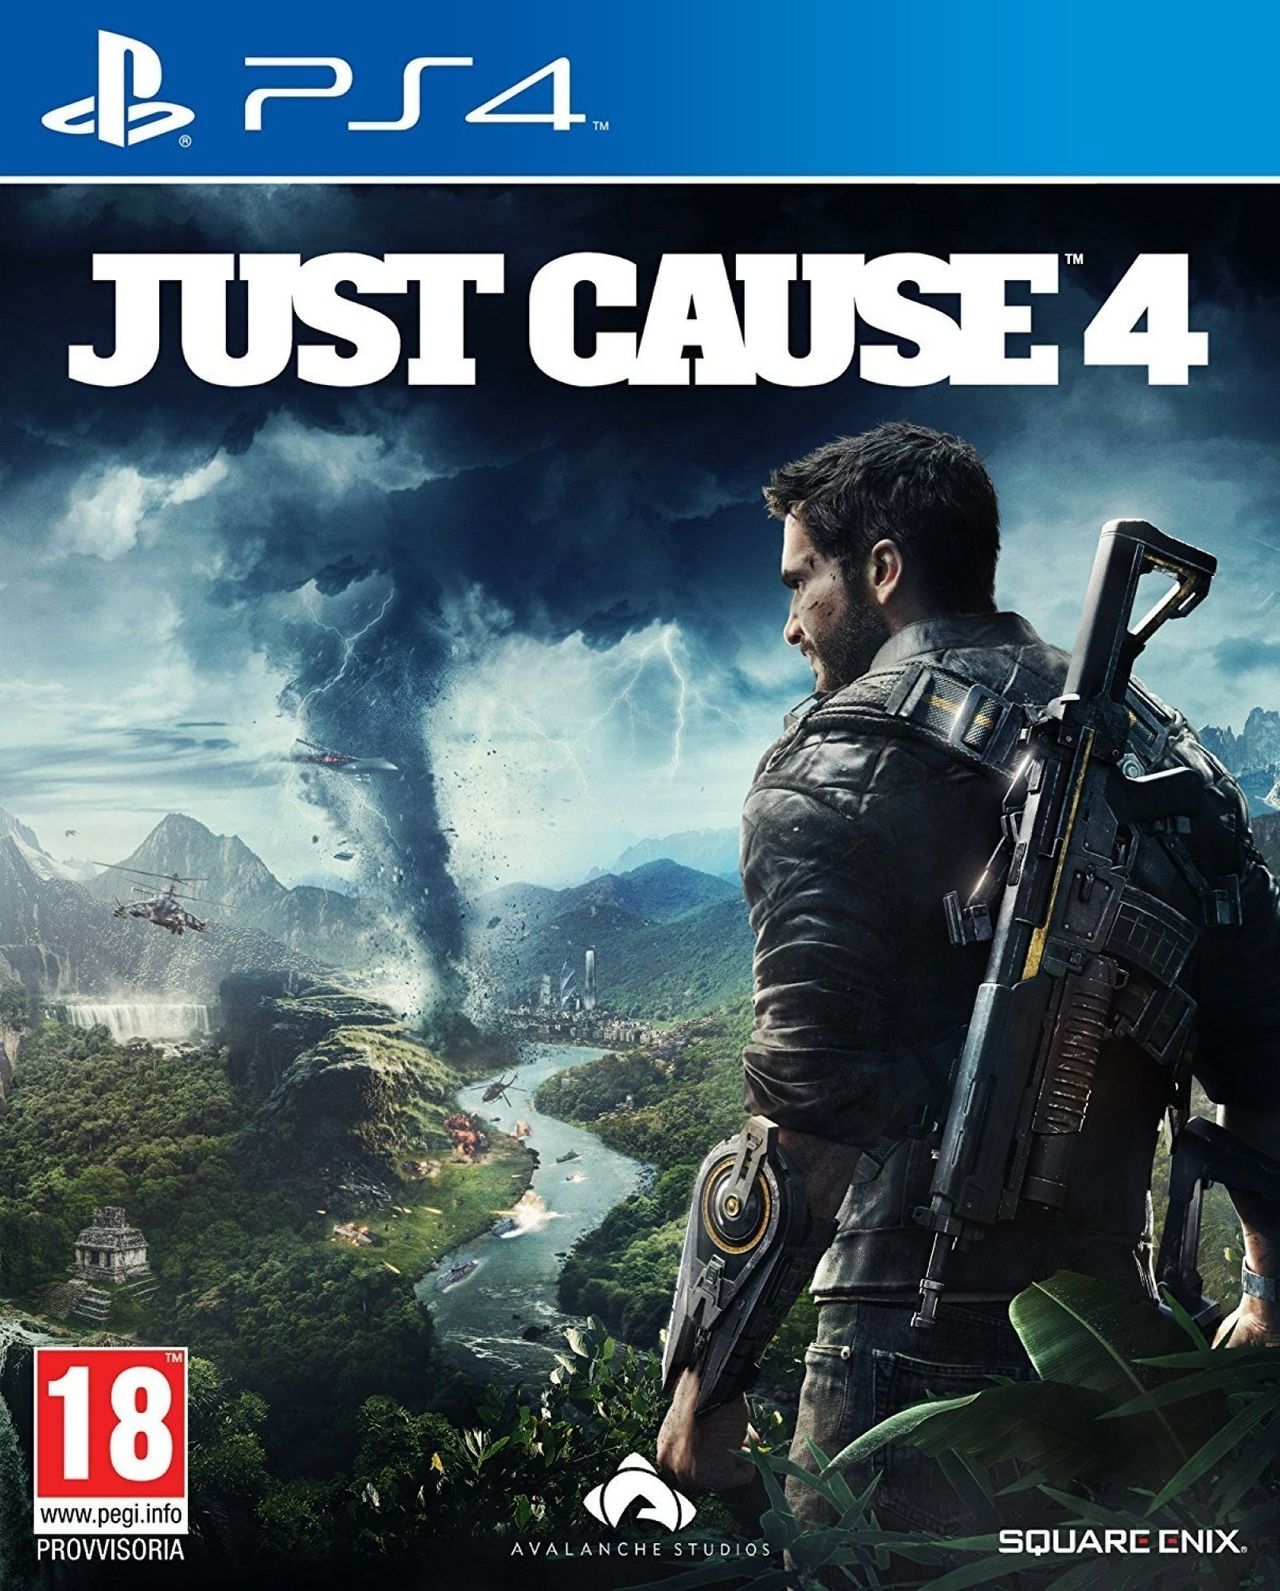 Just Cause 4 Videojuego (PS4, PC y Xbox One) Vandal